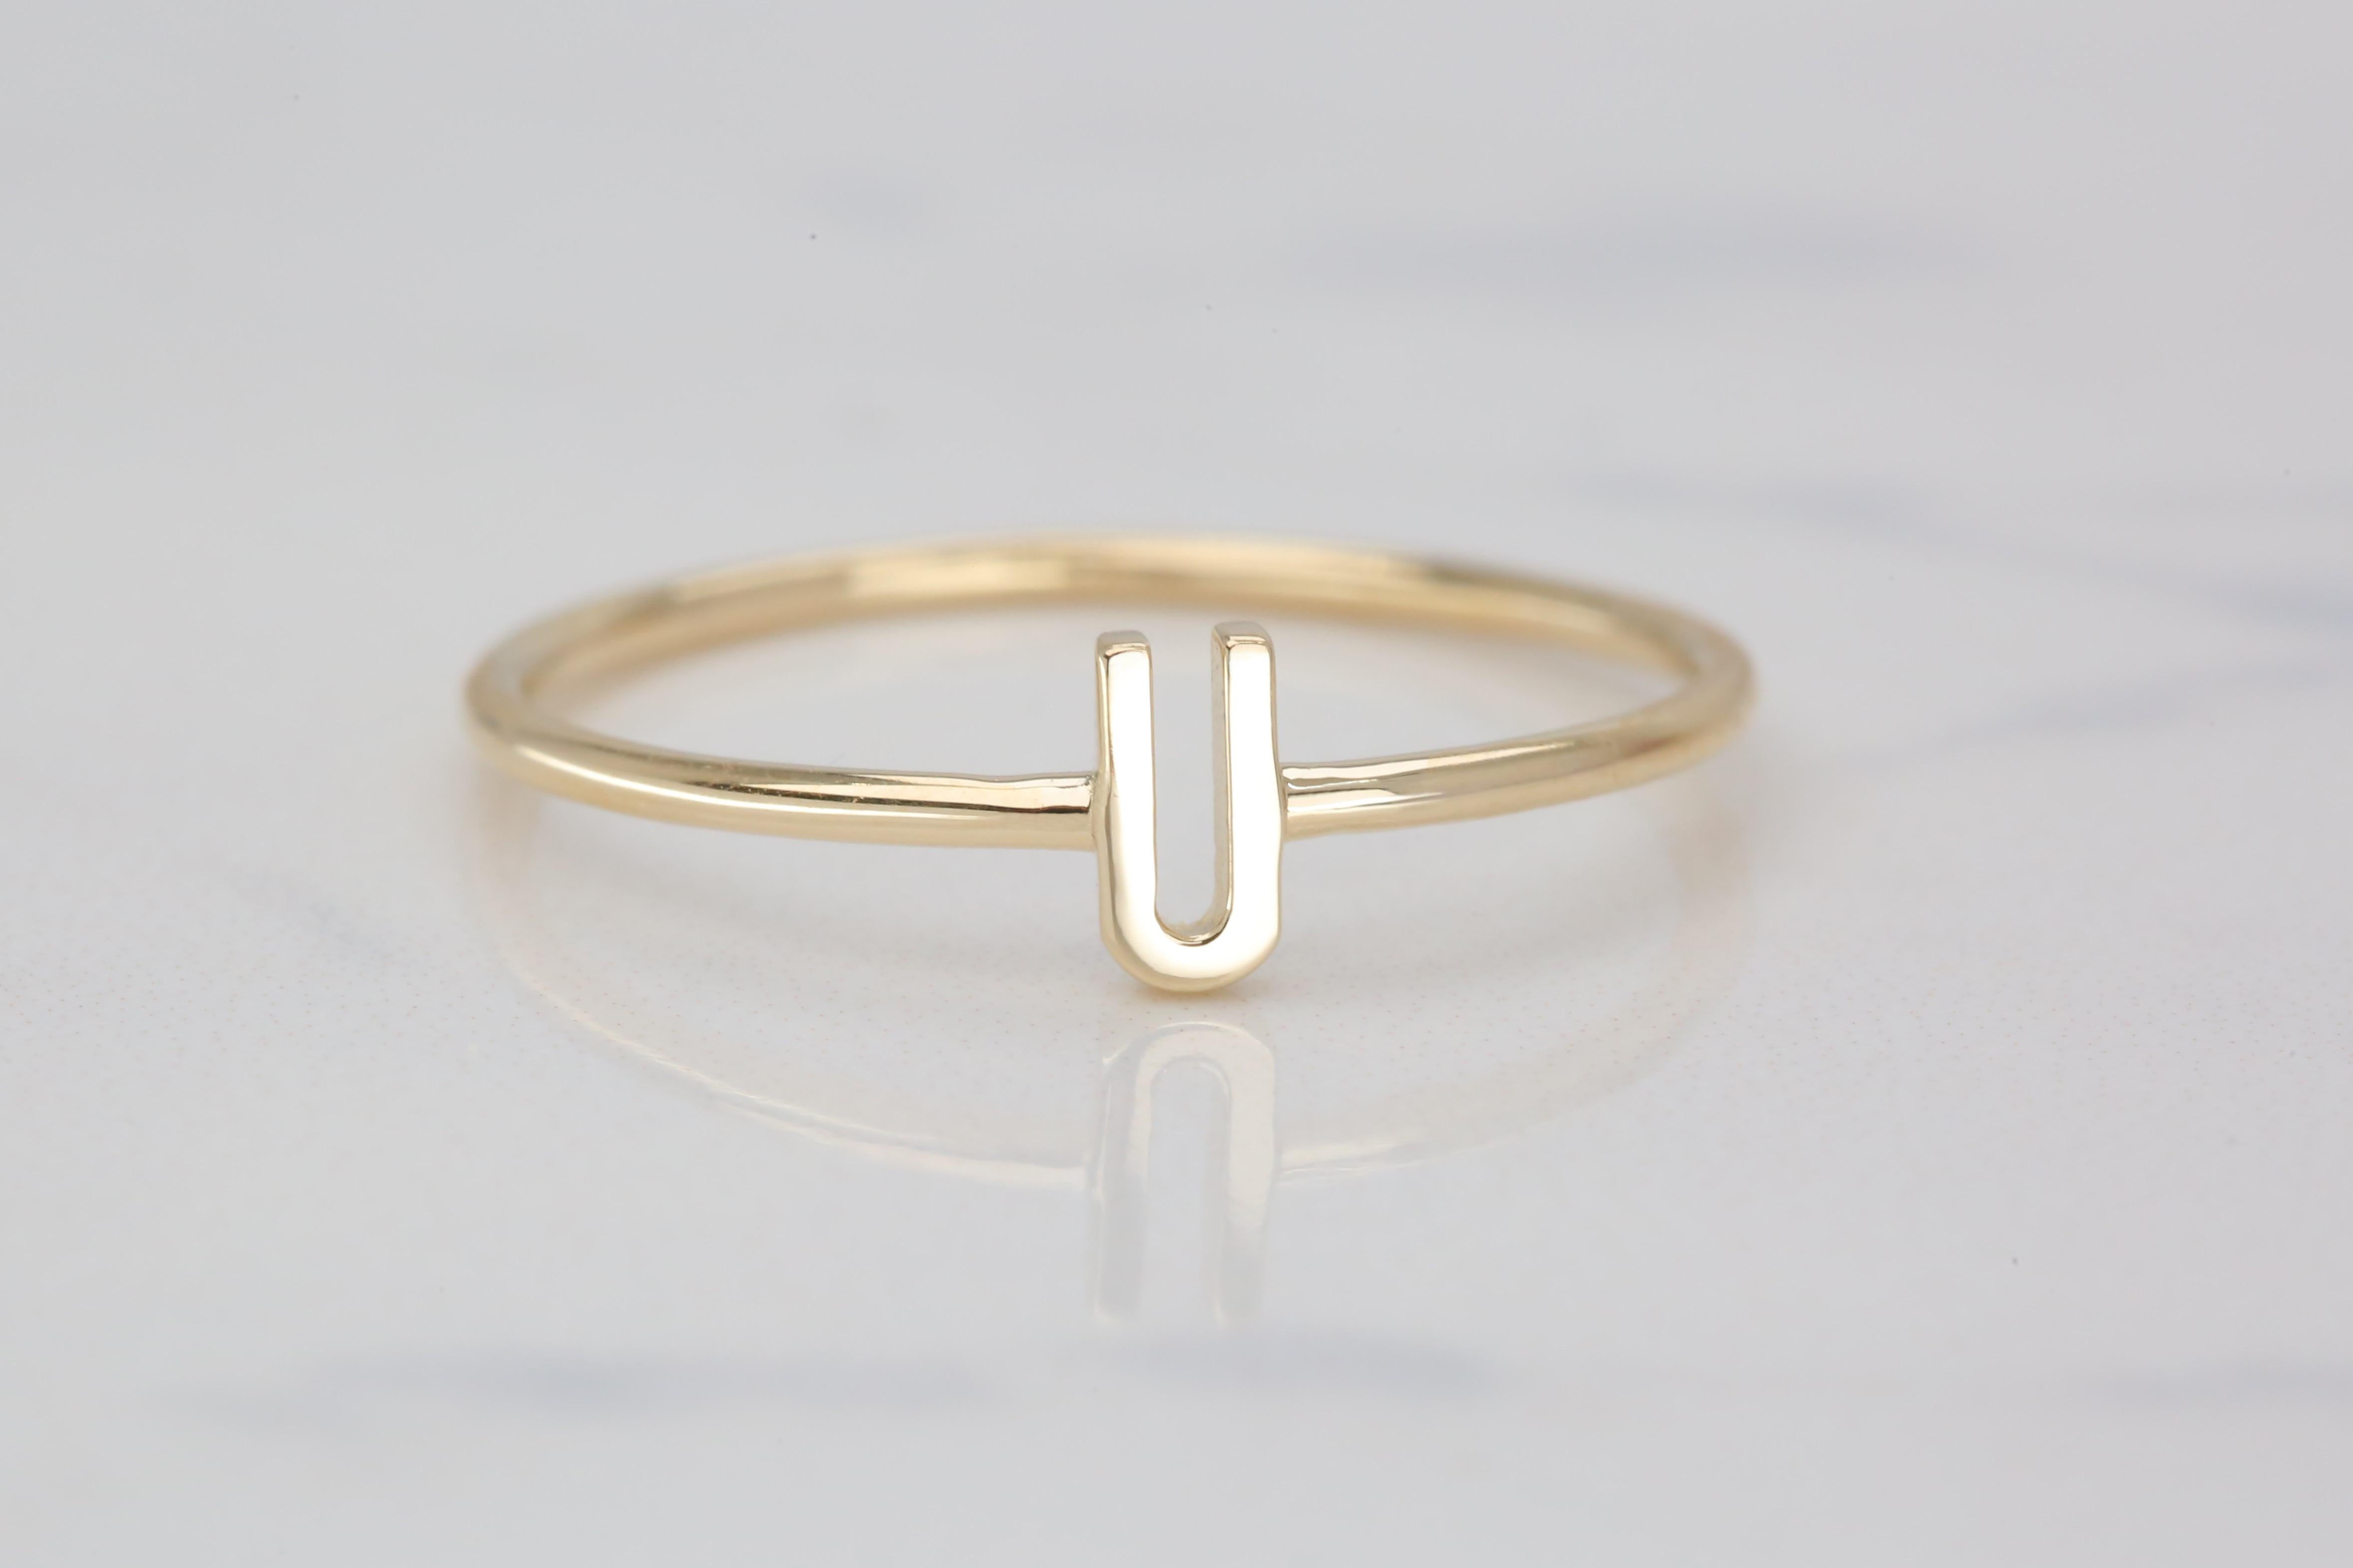 For Sale:  14K Gold Initial U Letter Ring, Personalized Initial Letter Ring 4